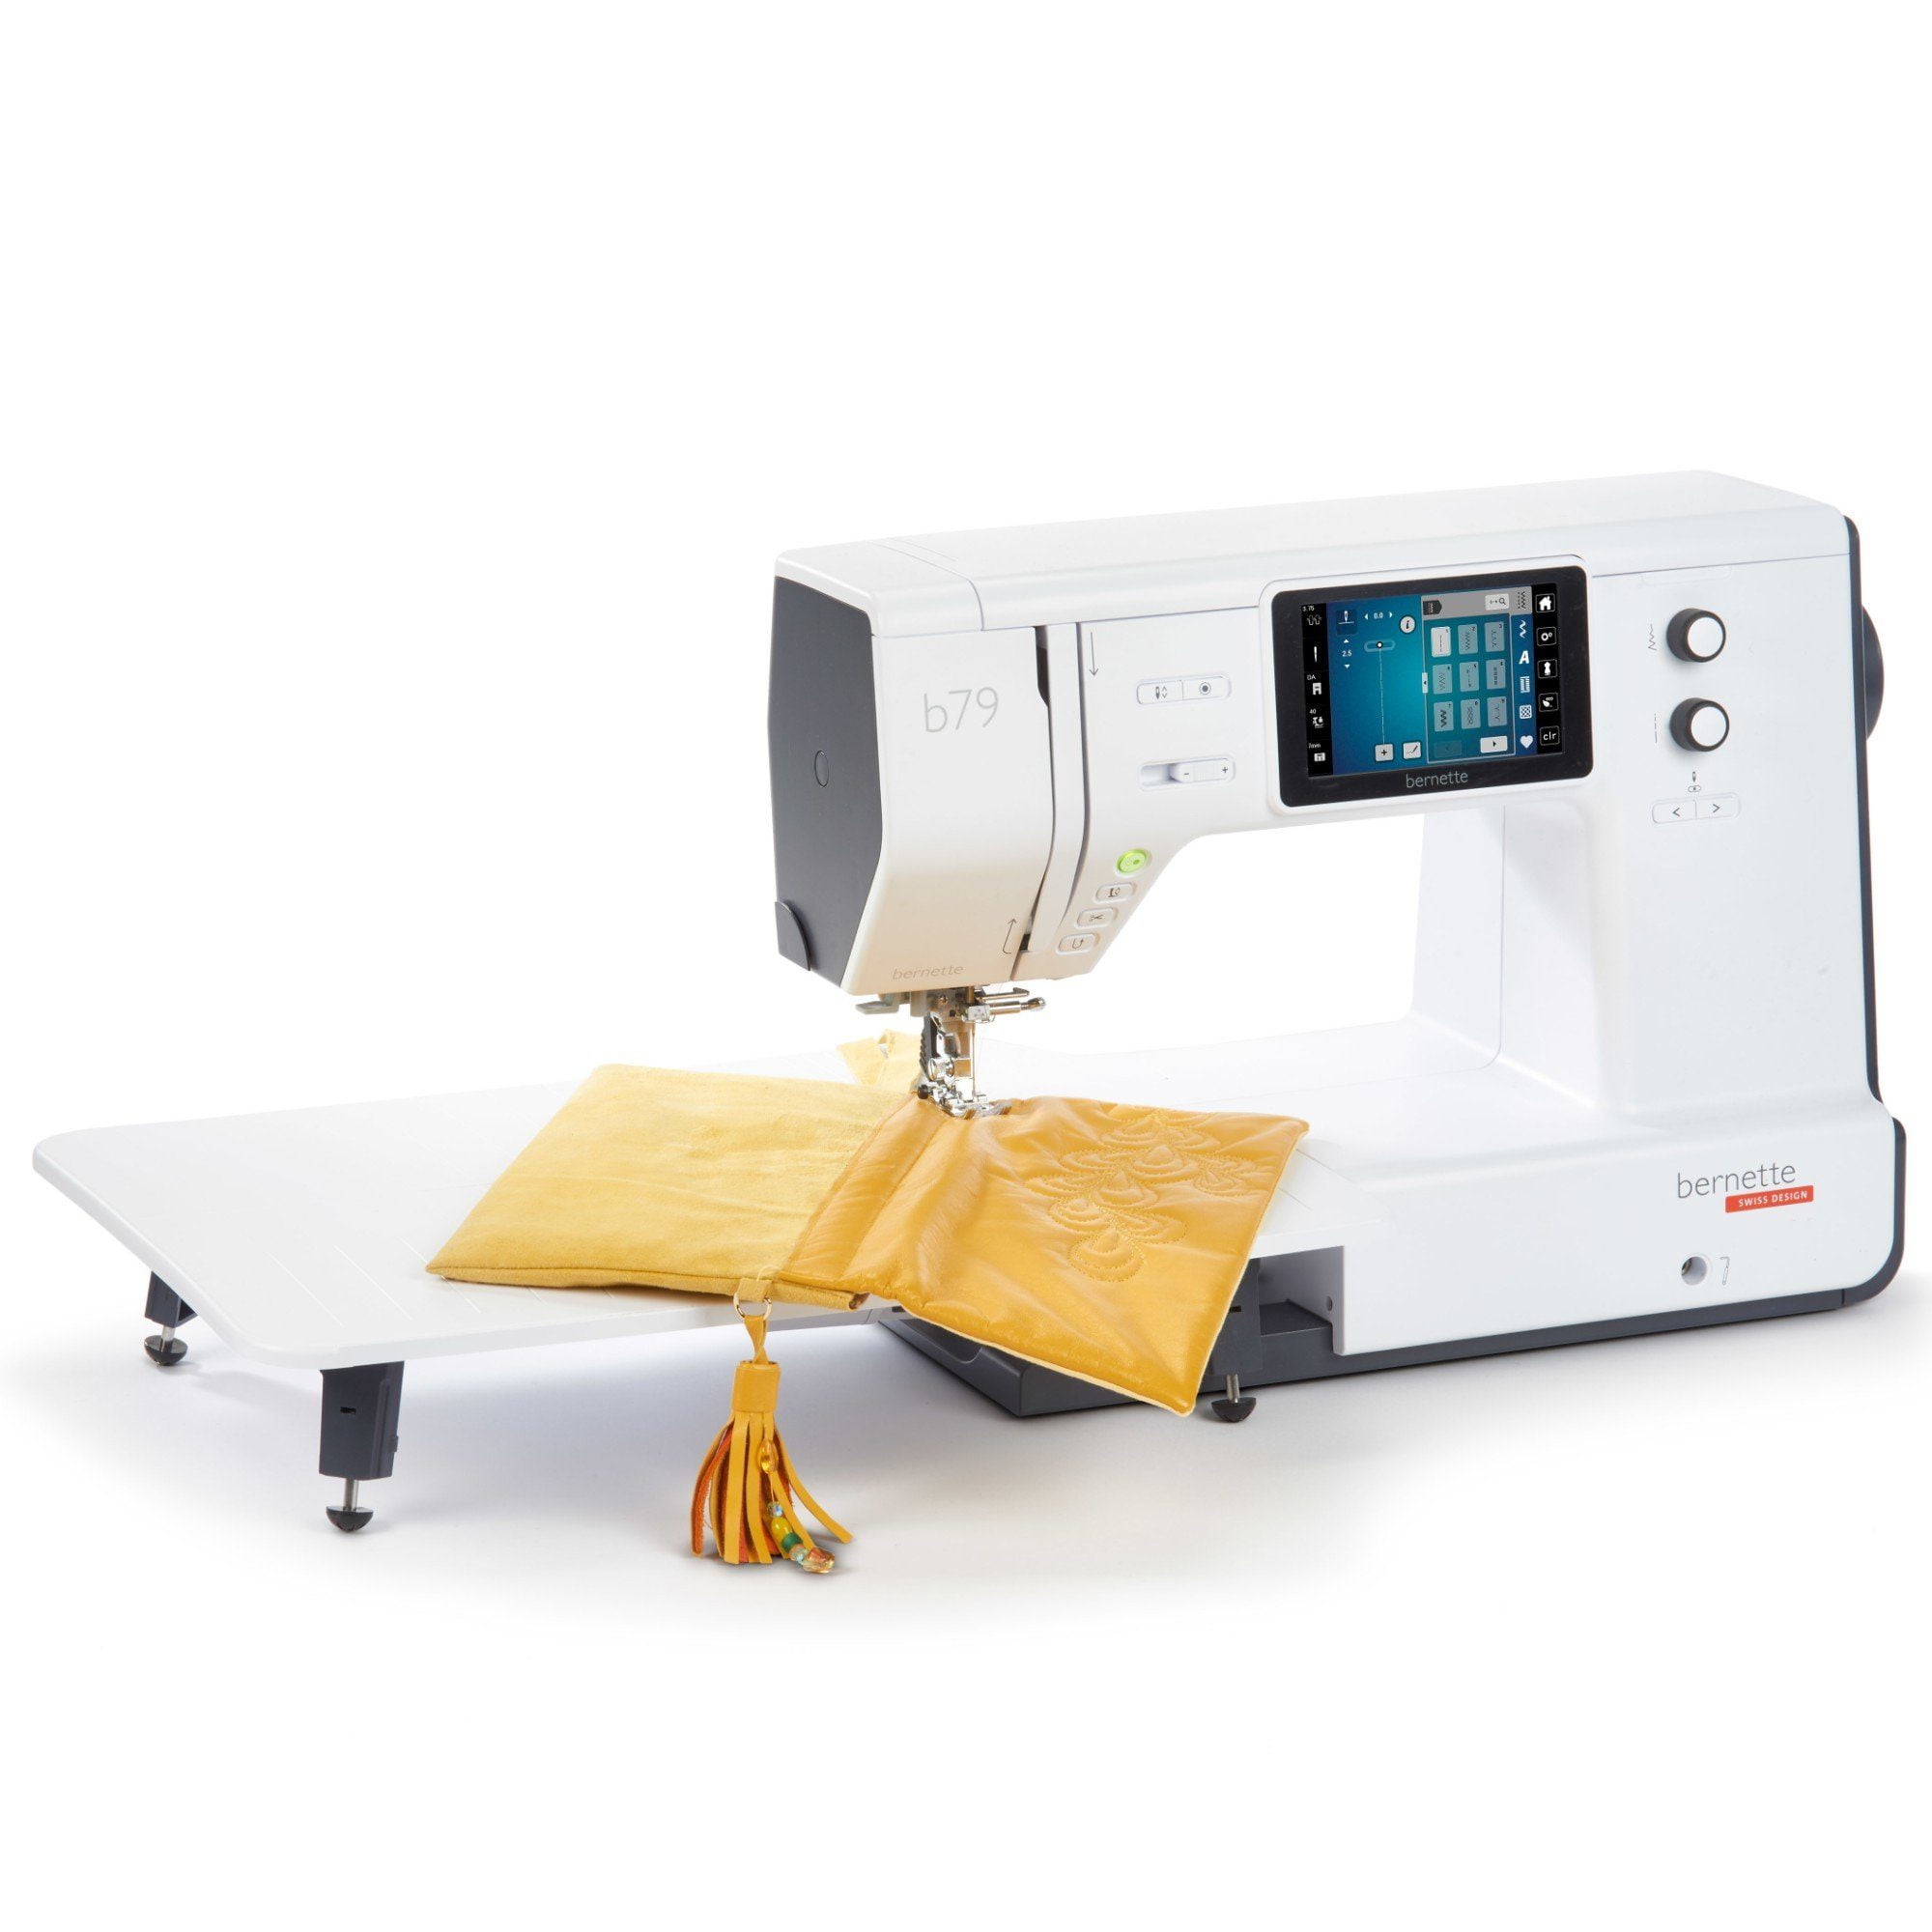 Brother LB5500 2-In-1 Sewing and Embroidery Machine with 135 Built-In  Designs